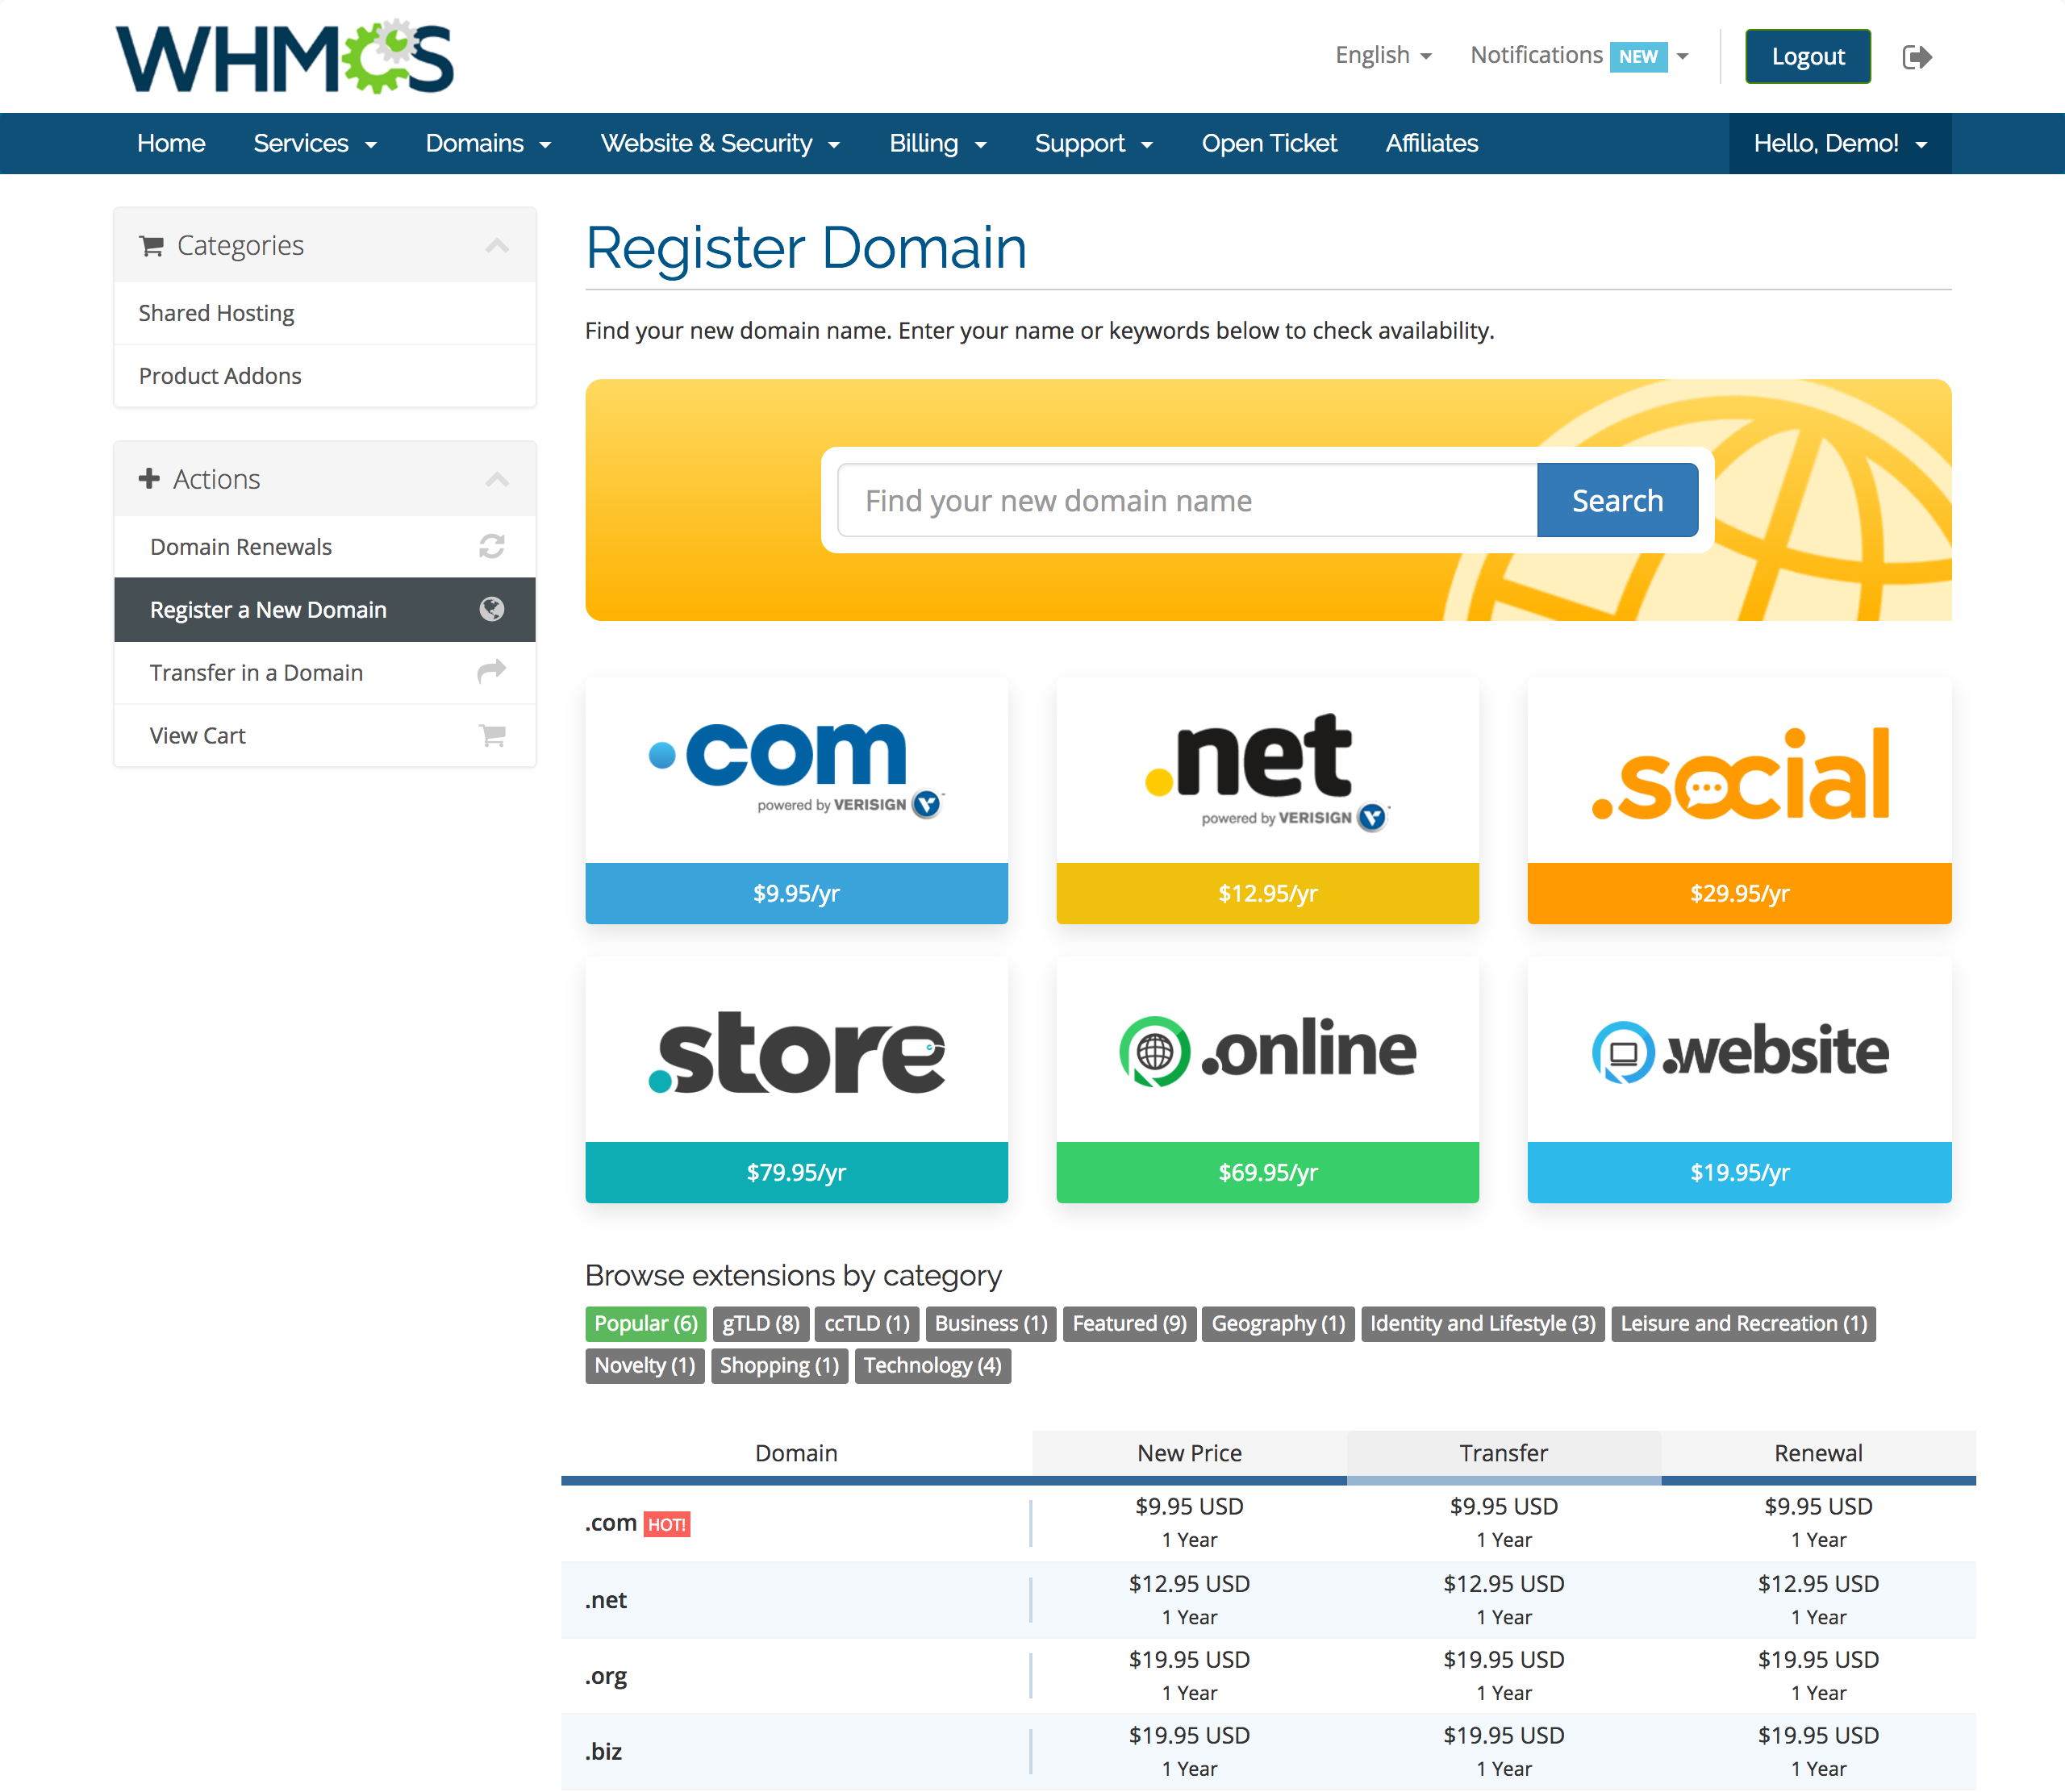 The Register Domain page in the Client Area